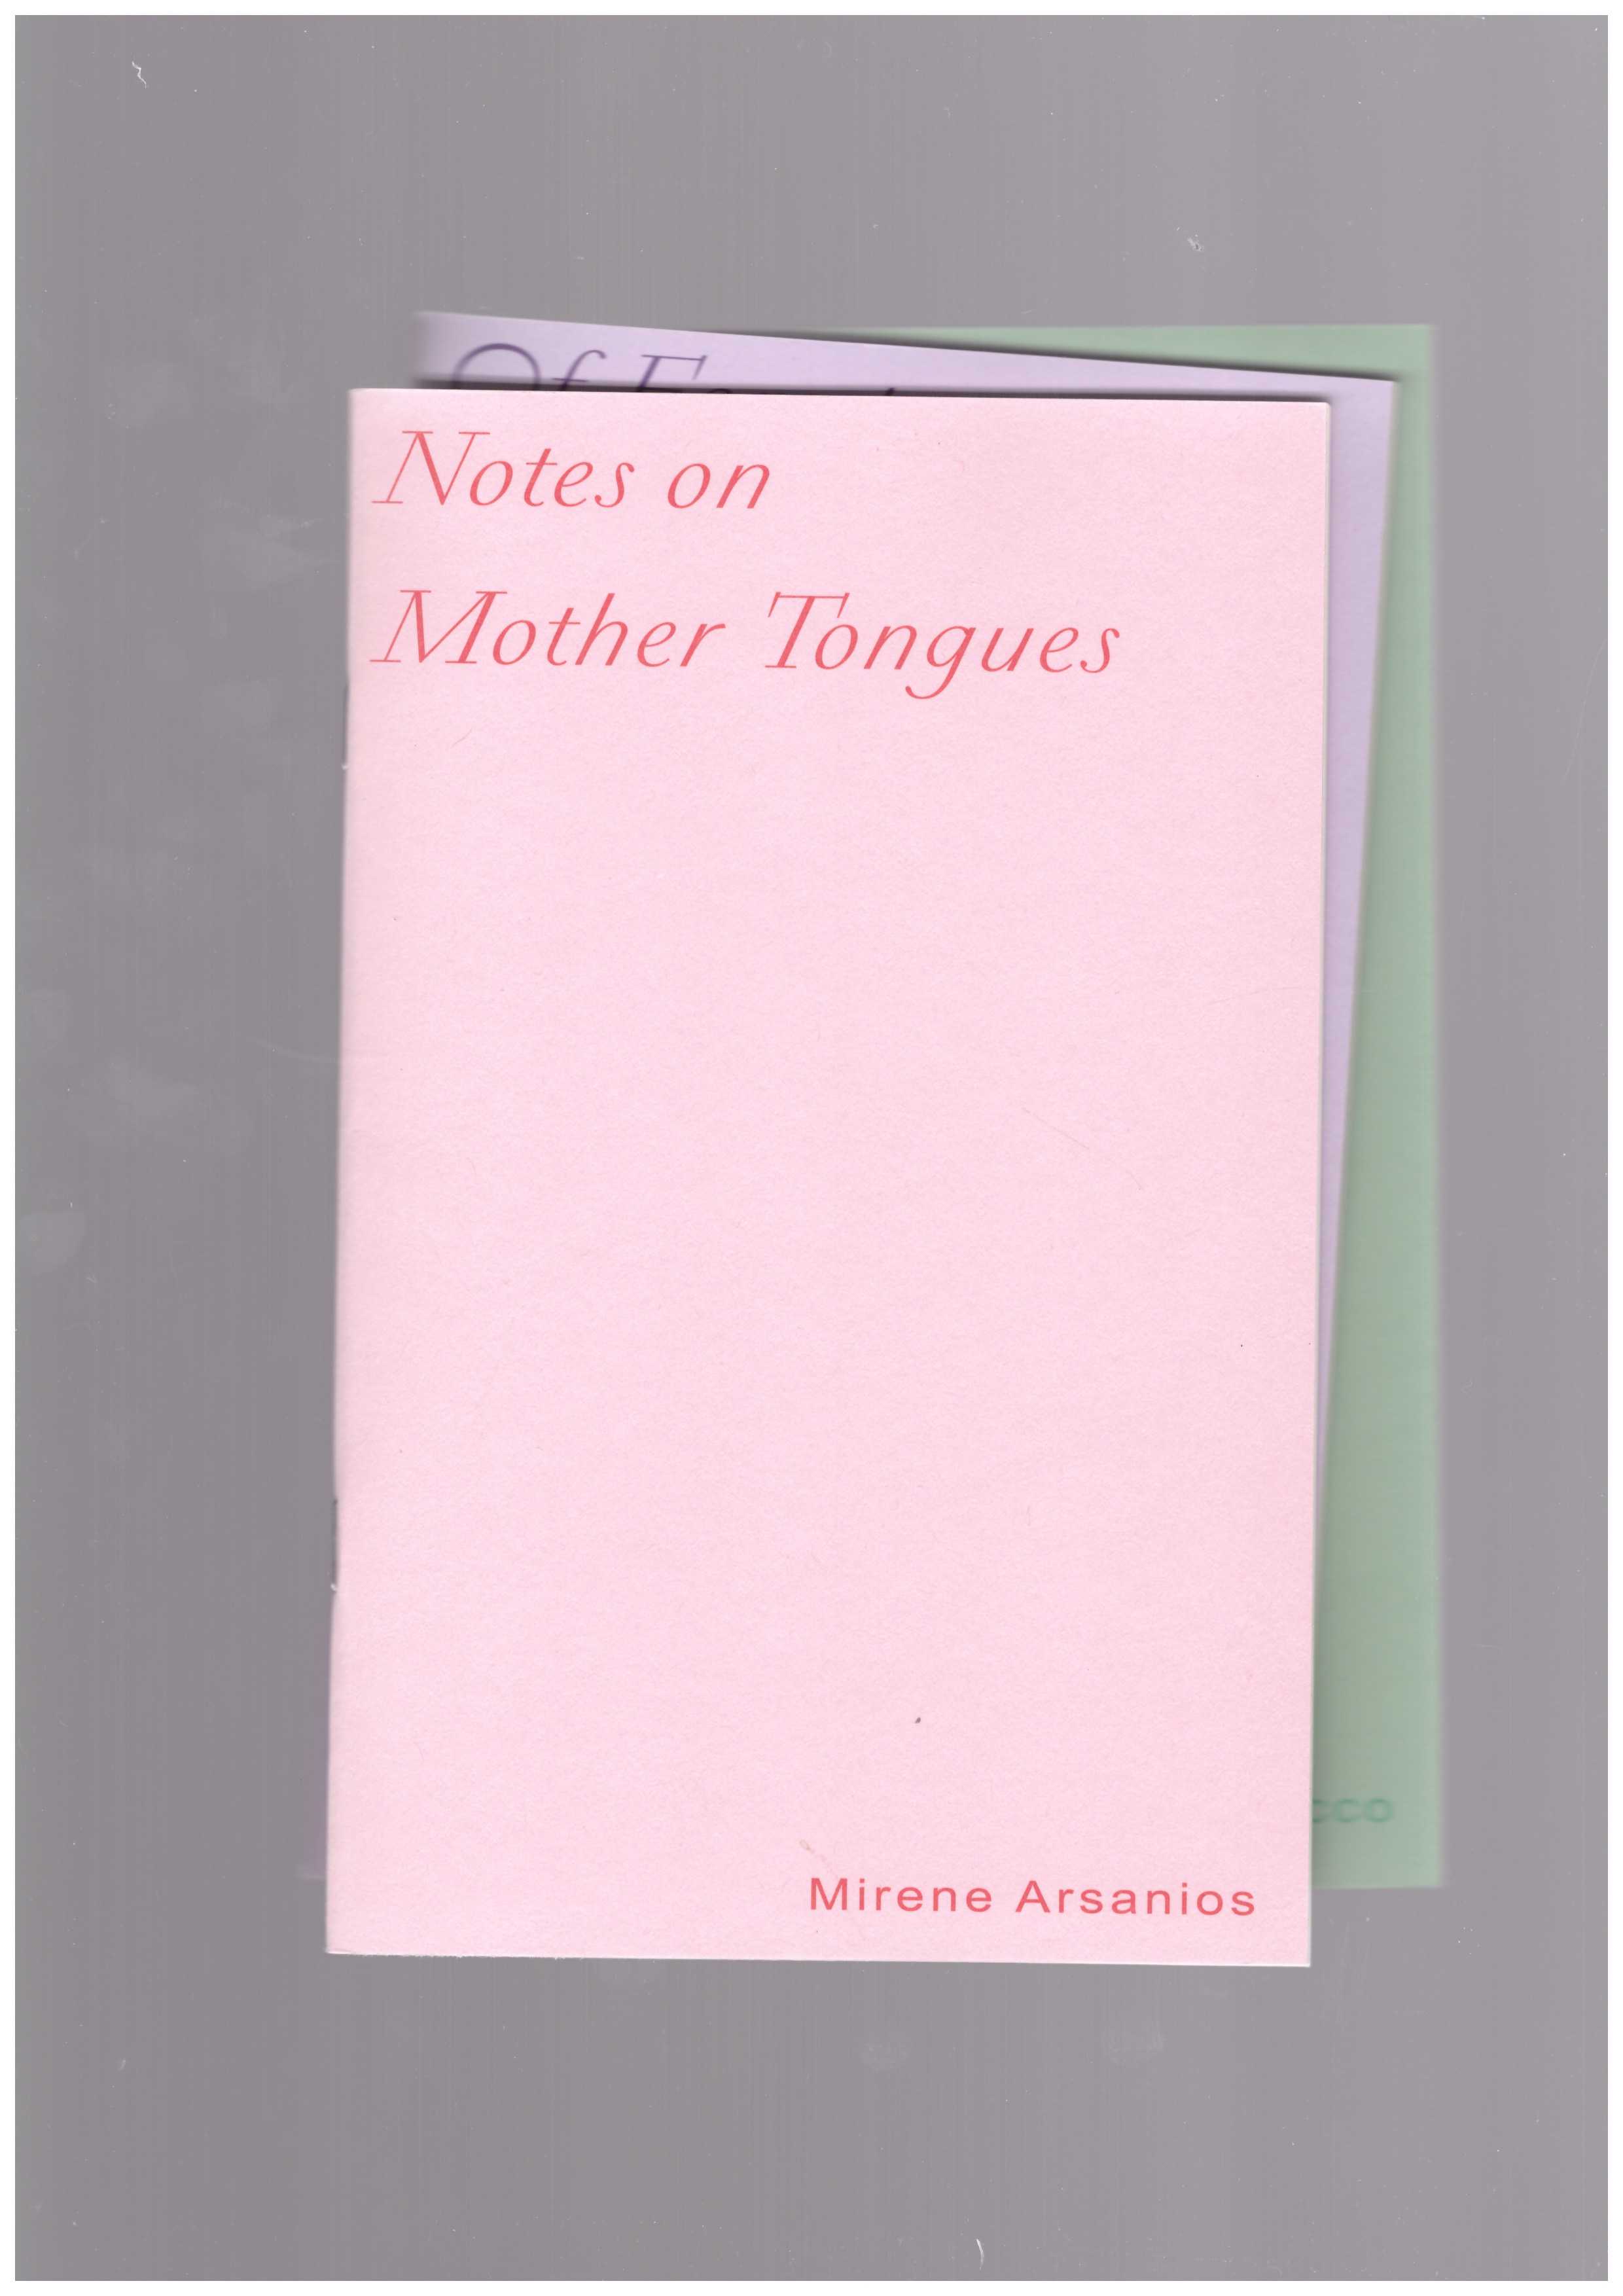 ARSANIOS, Mirene  - Notes on Mother Tongues